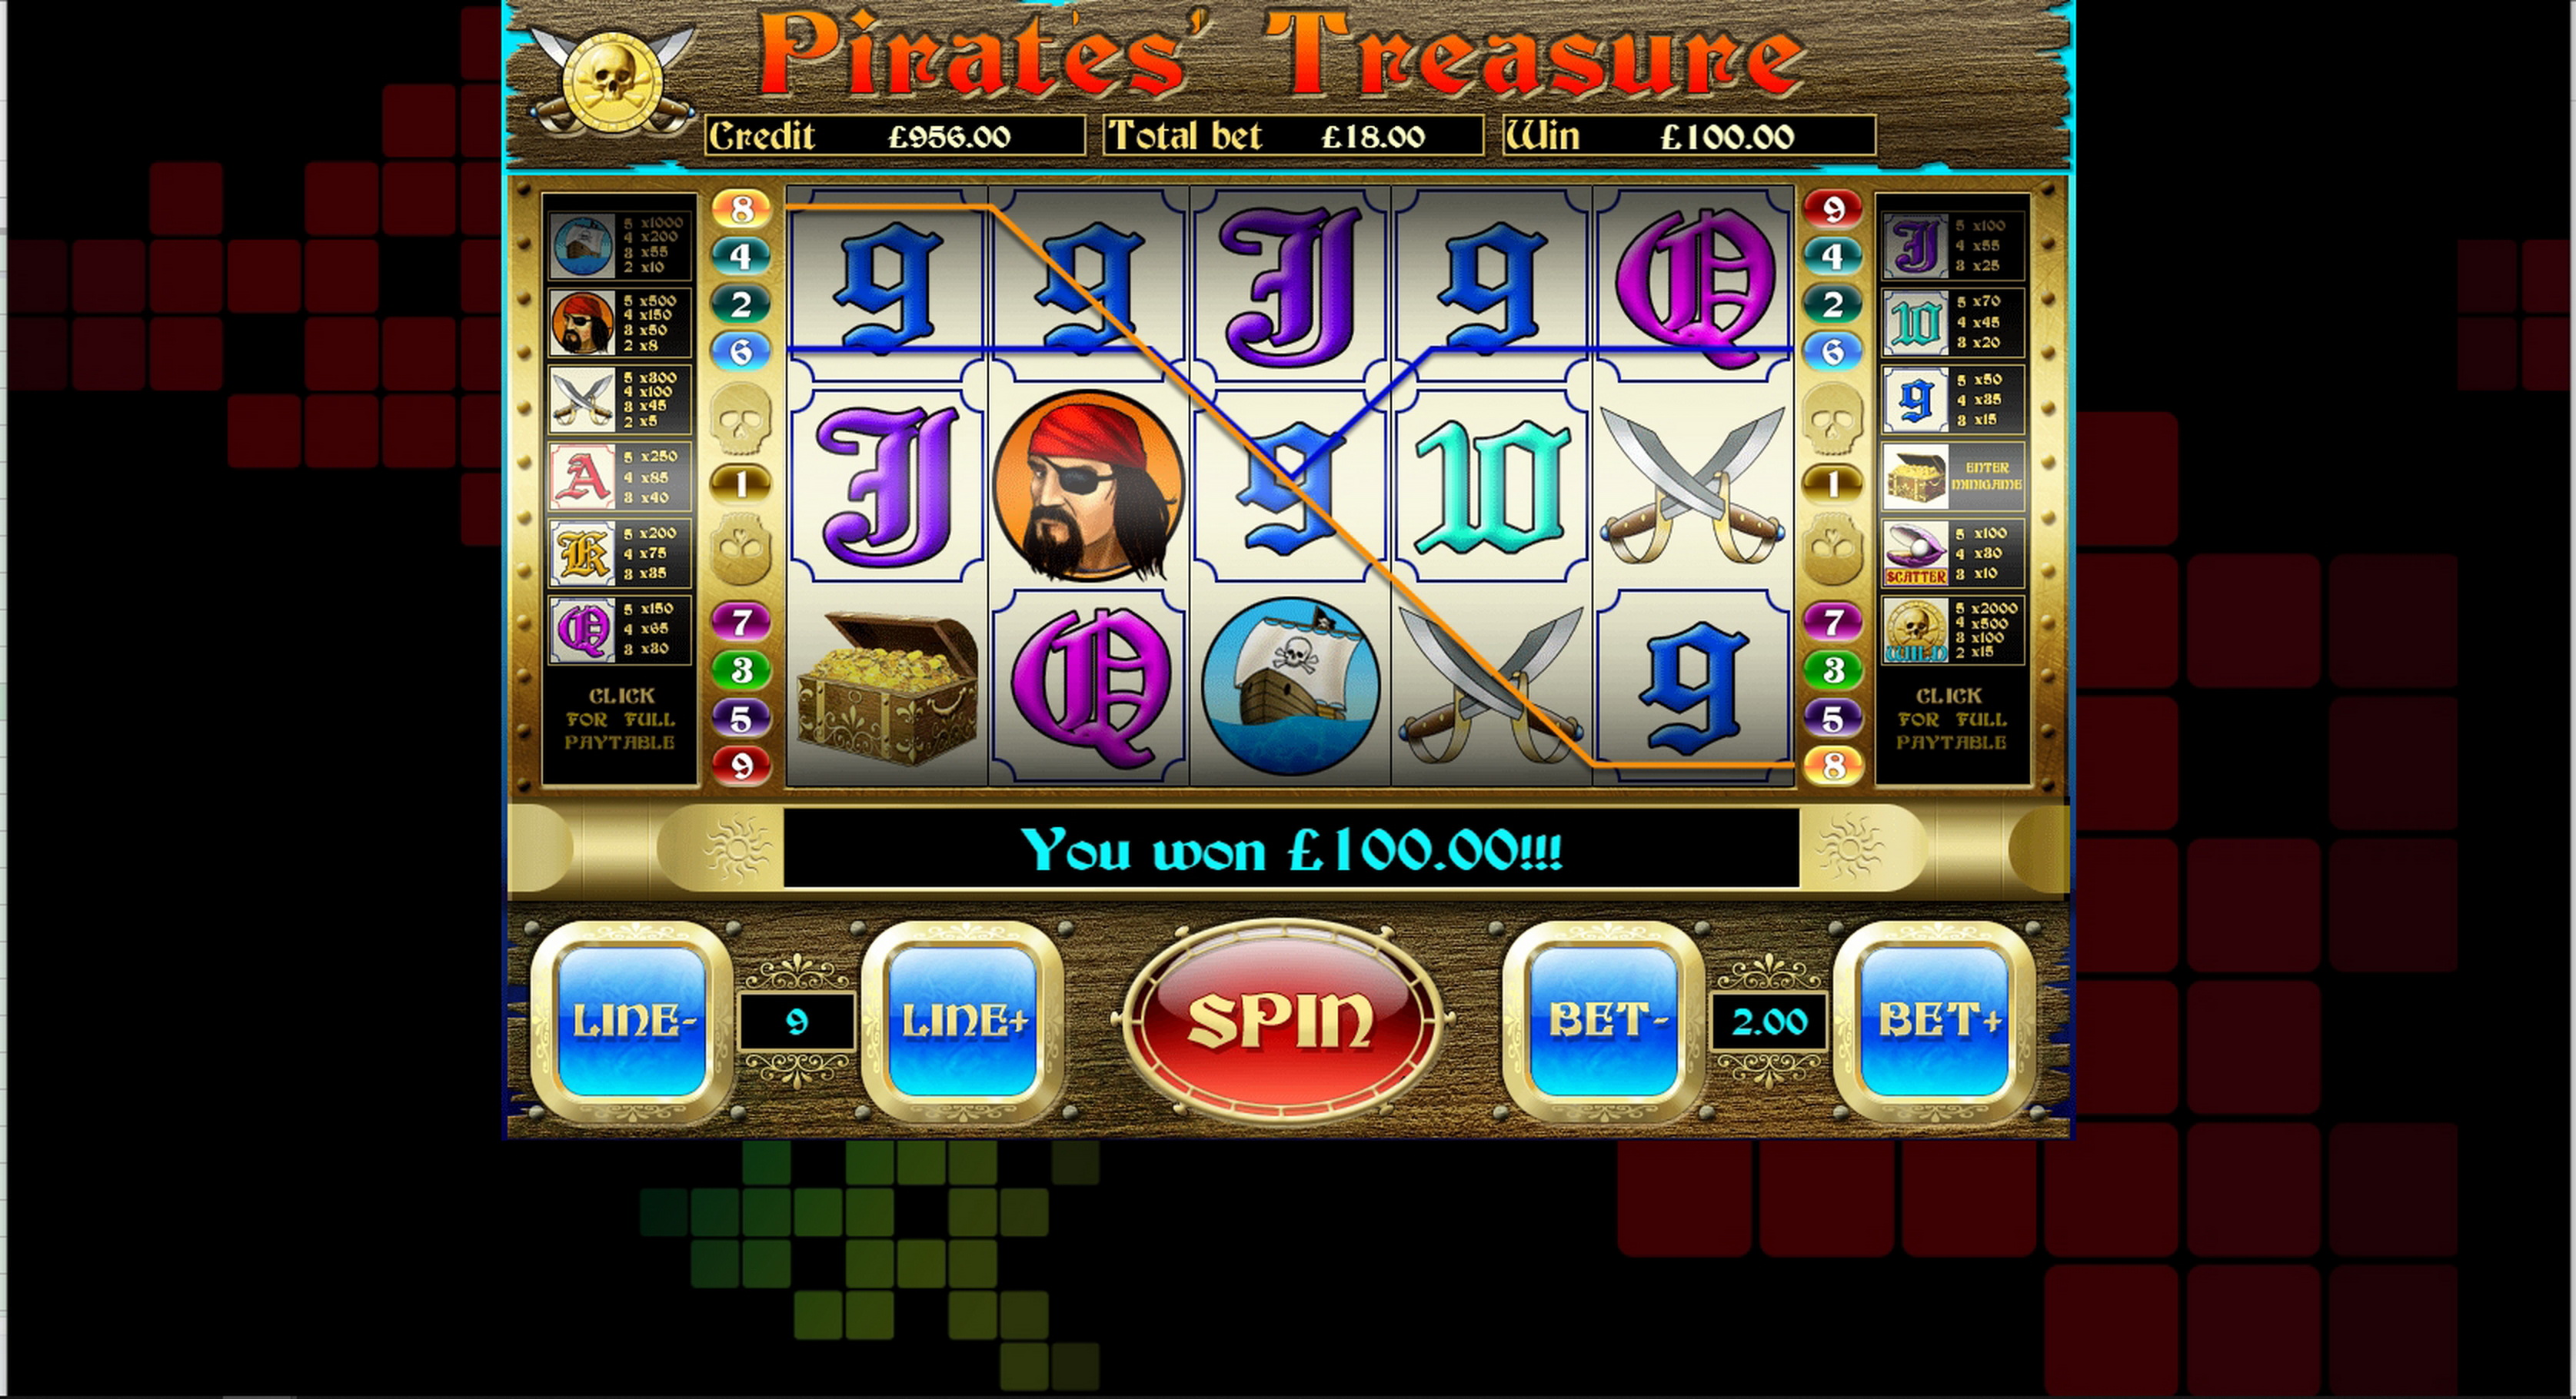 Win Money in Pirates Treasure Free Slot Game by Slot Factory